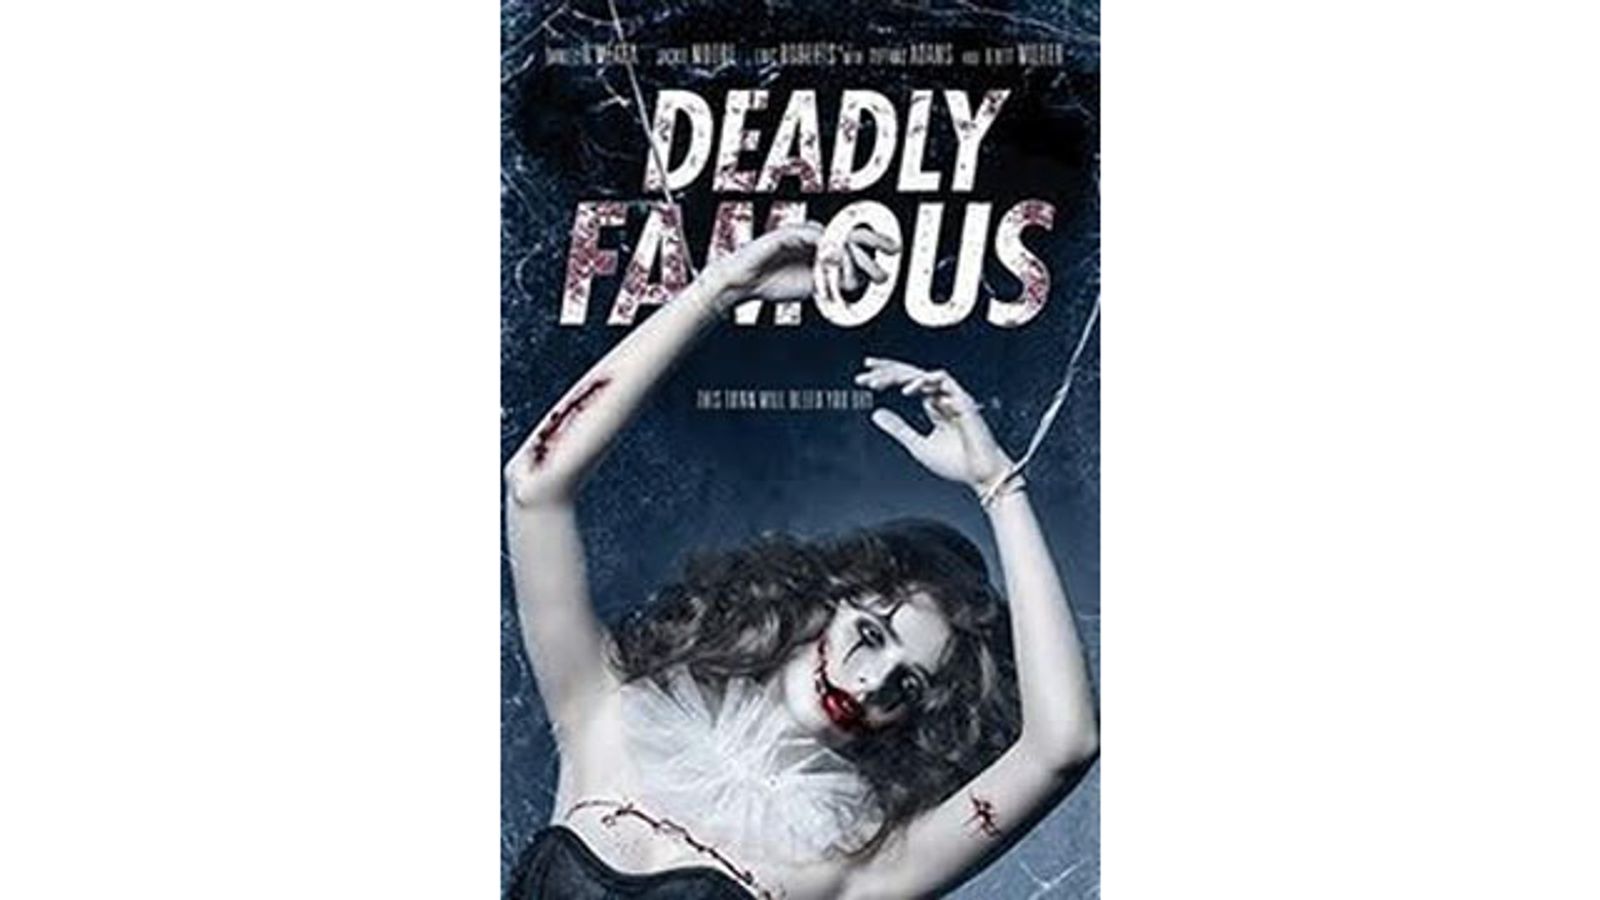 Adult Performers Featured In New Horror Film ‘Deadly Famous’